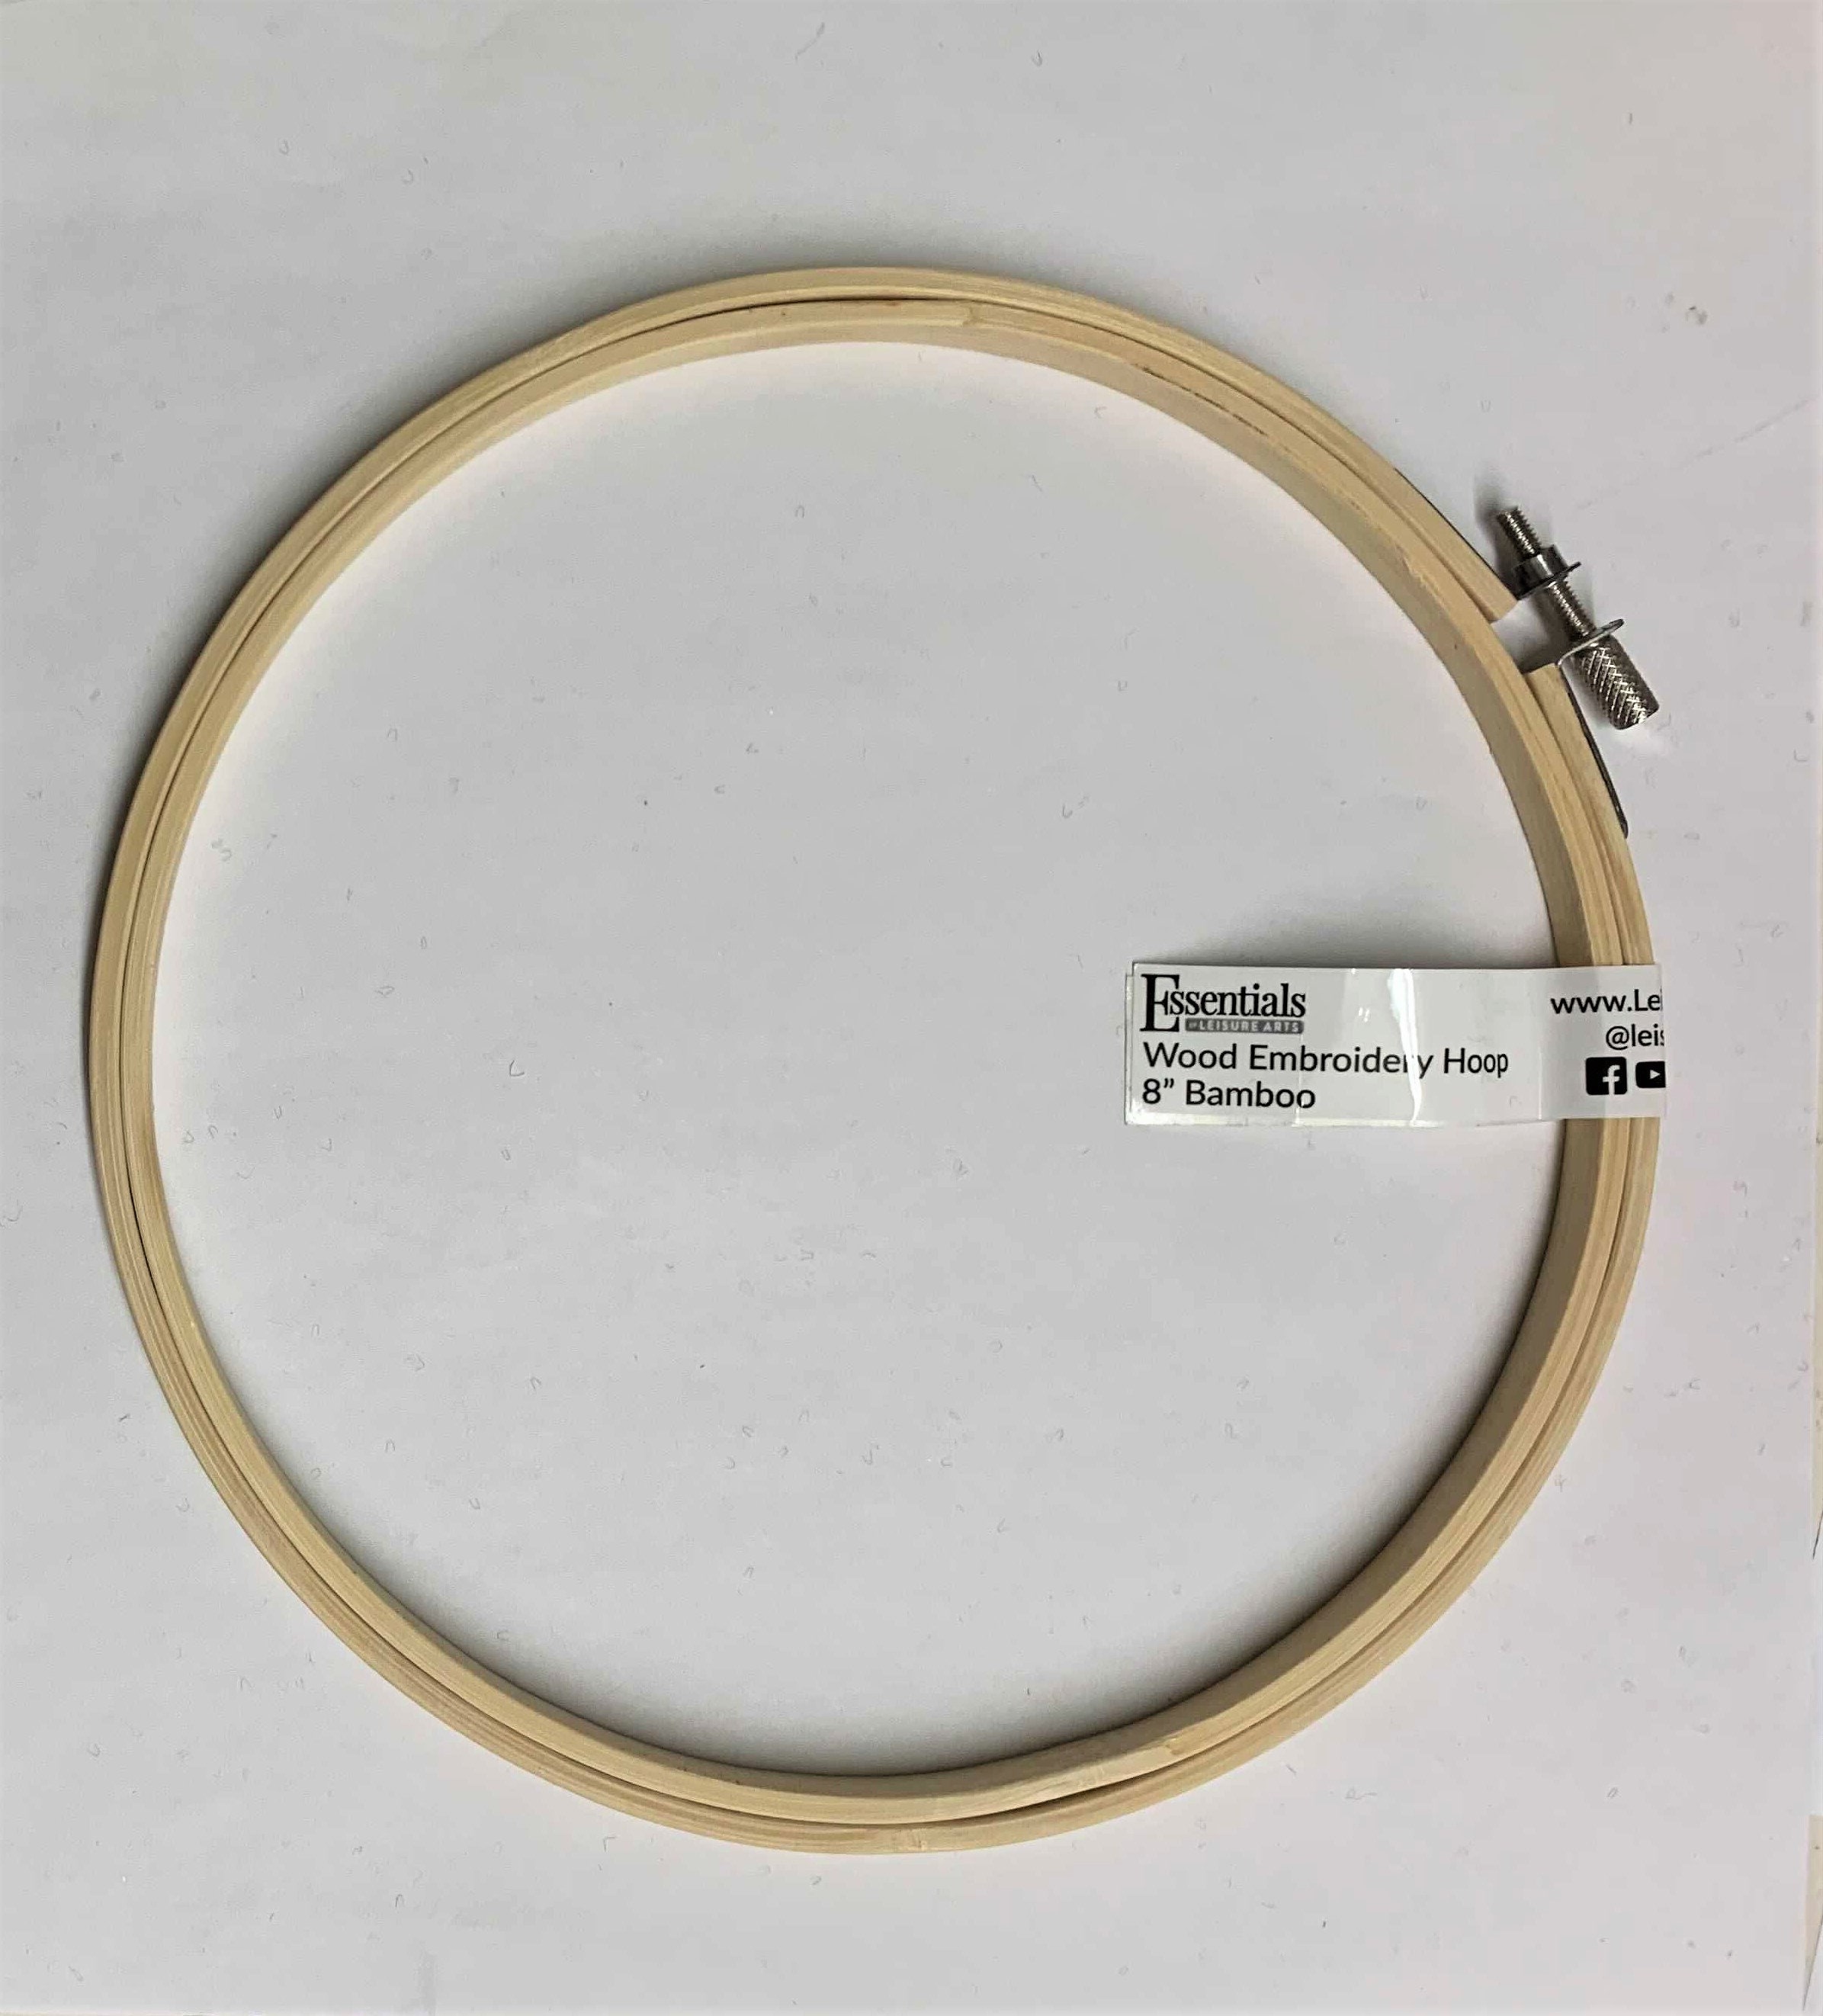 Essentials by Leisure Arts Wood Embroidery Hoop 4 Bamboo